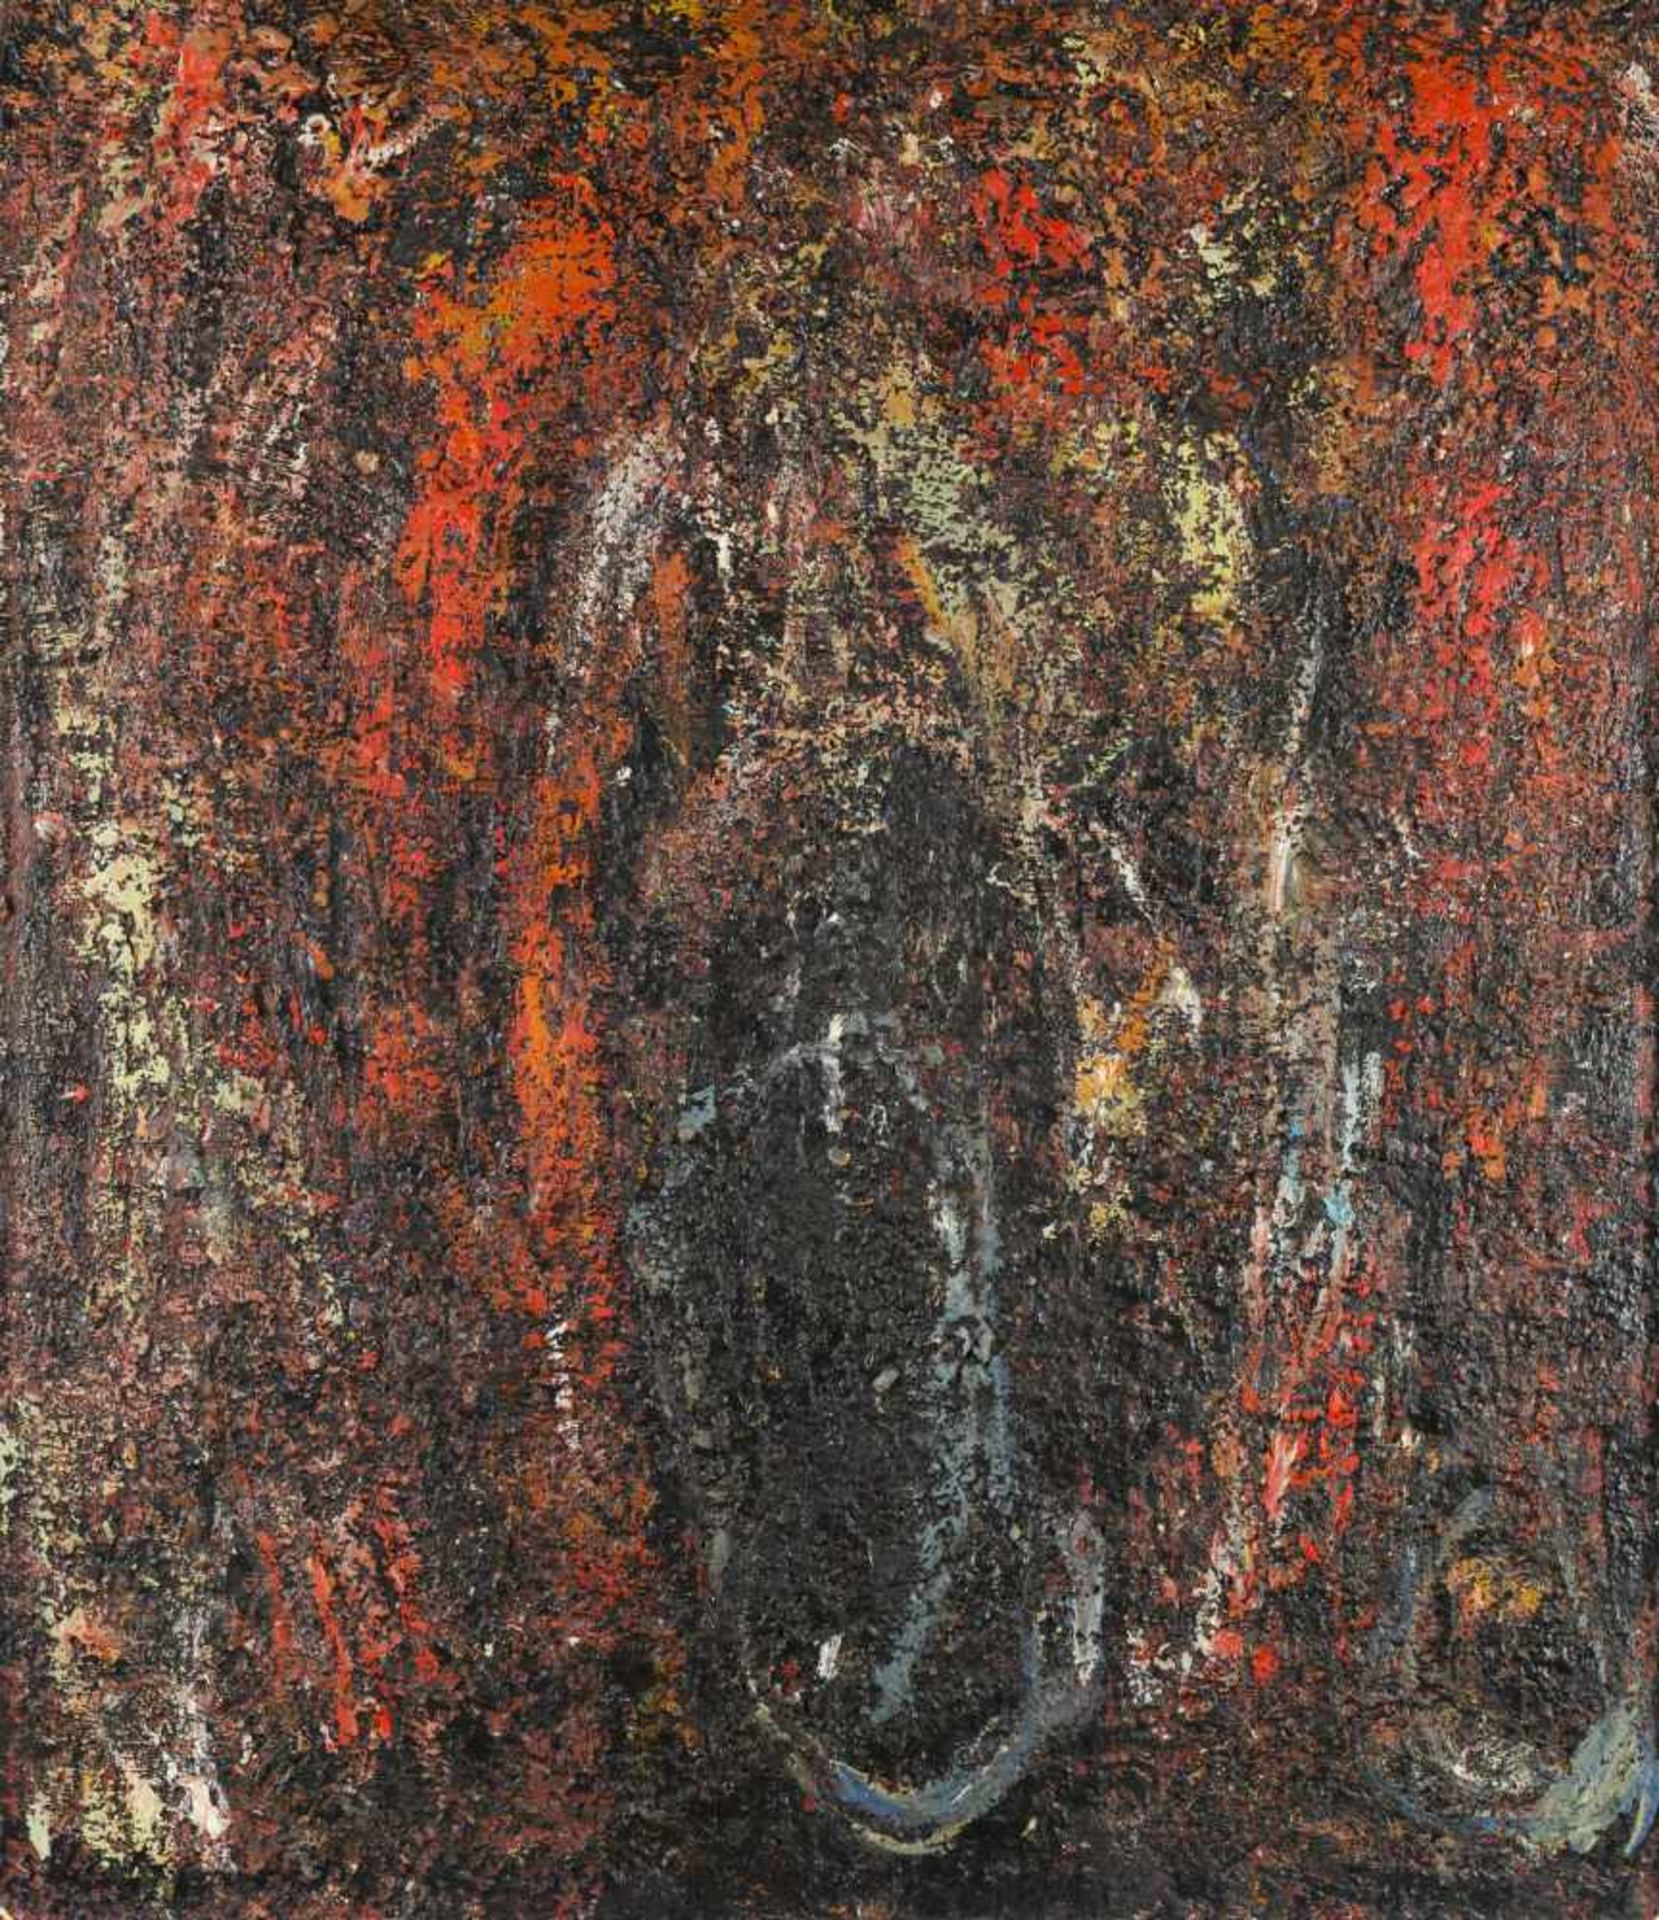 Gangl, HaraldUntitled, 1992Oil on canvasVerso signed and dated41,3 x 35,4Gangl, HaraldOhne Titel,